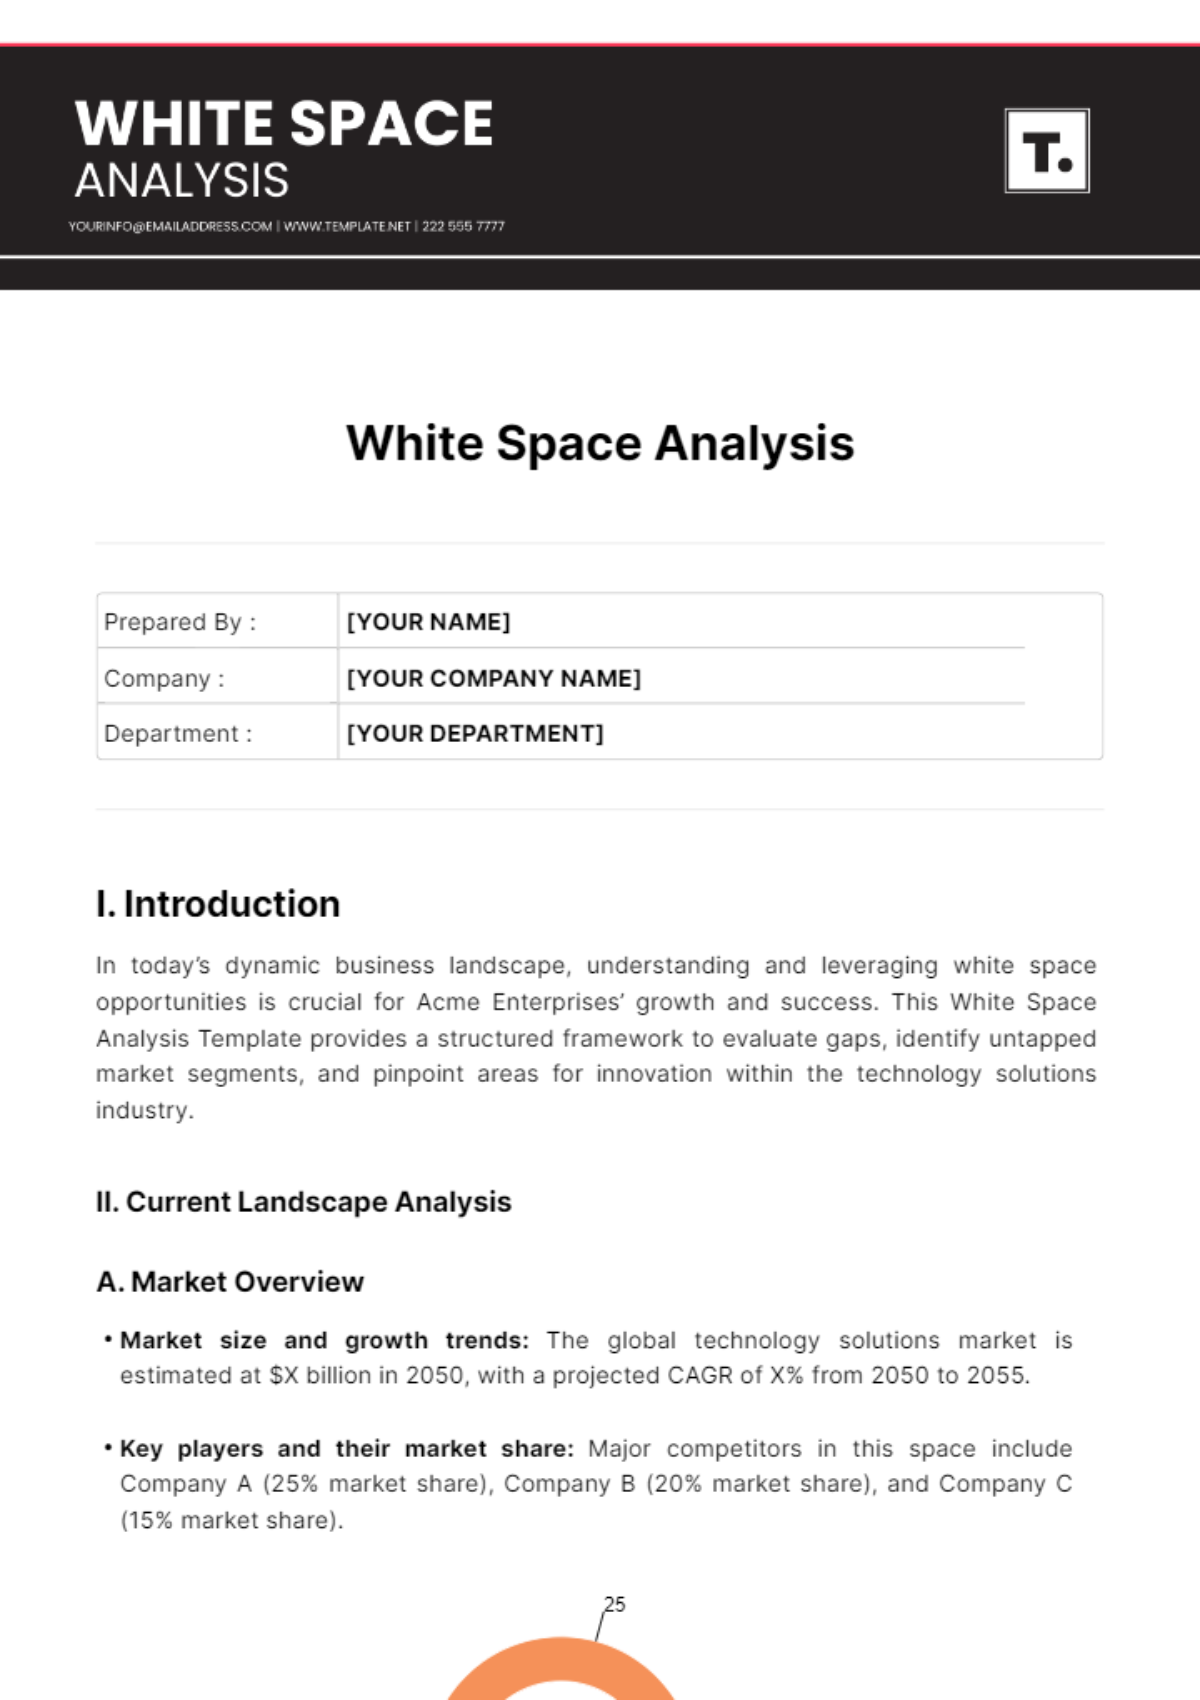 White Space Analysis Template